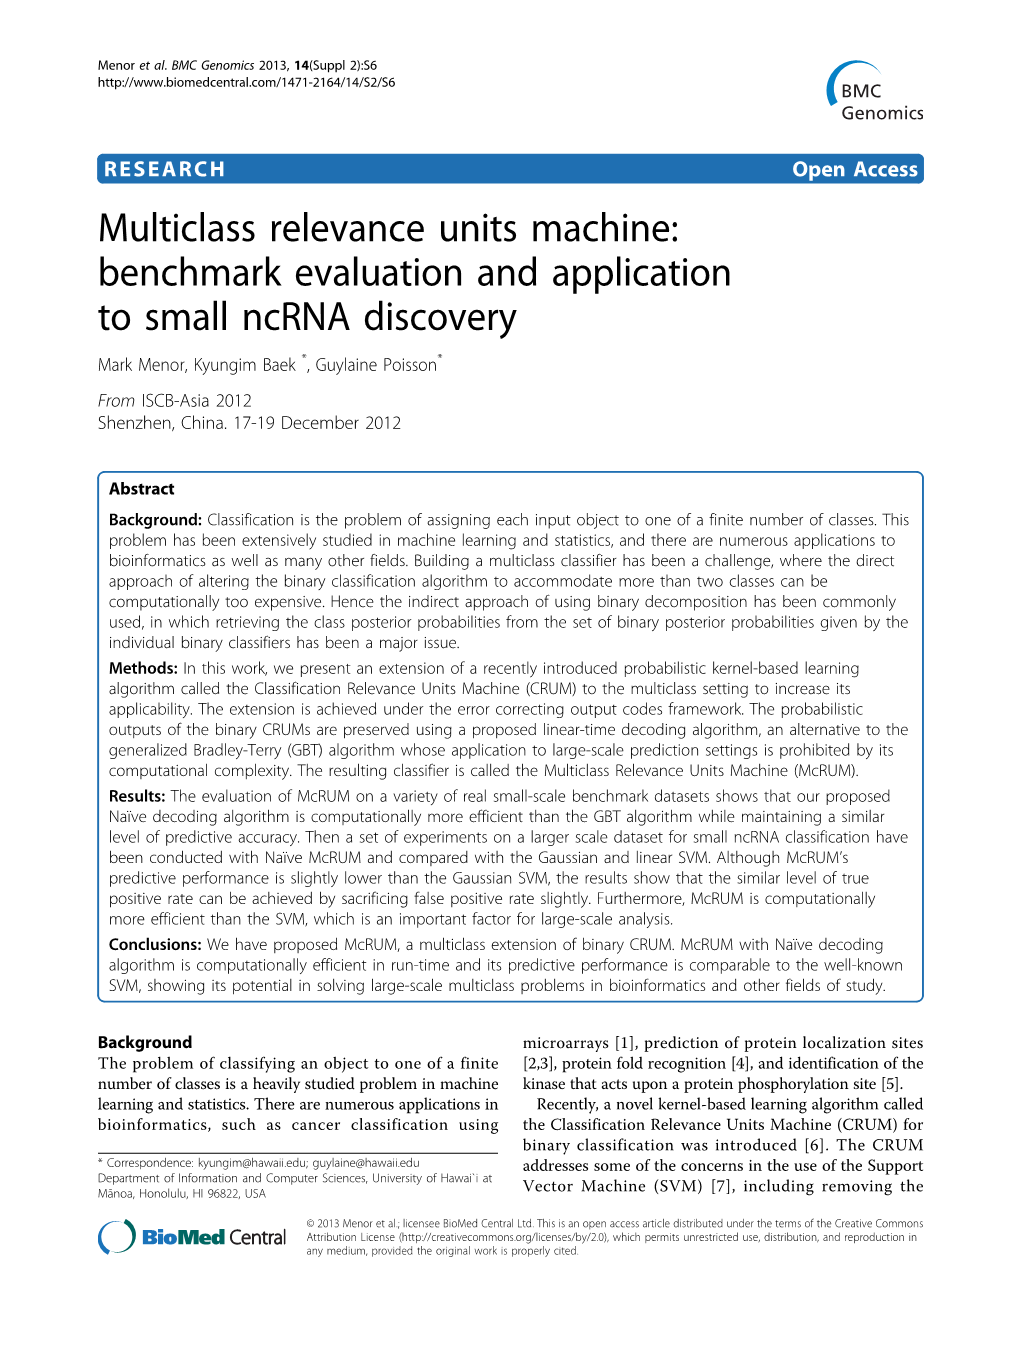 Multiclass Relevance Units Machine: Benchmark Evaluation And